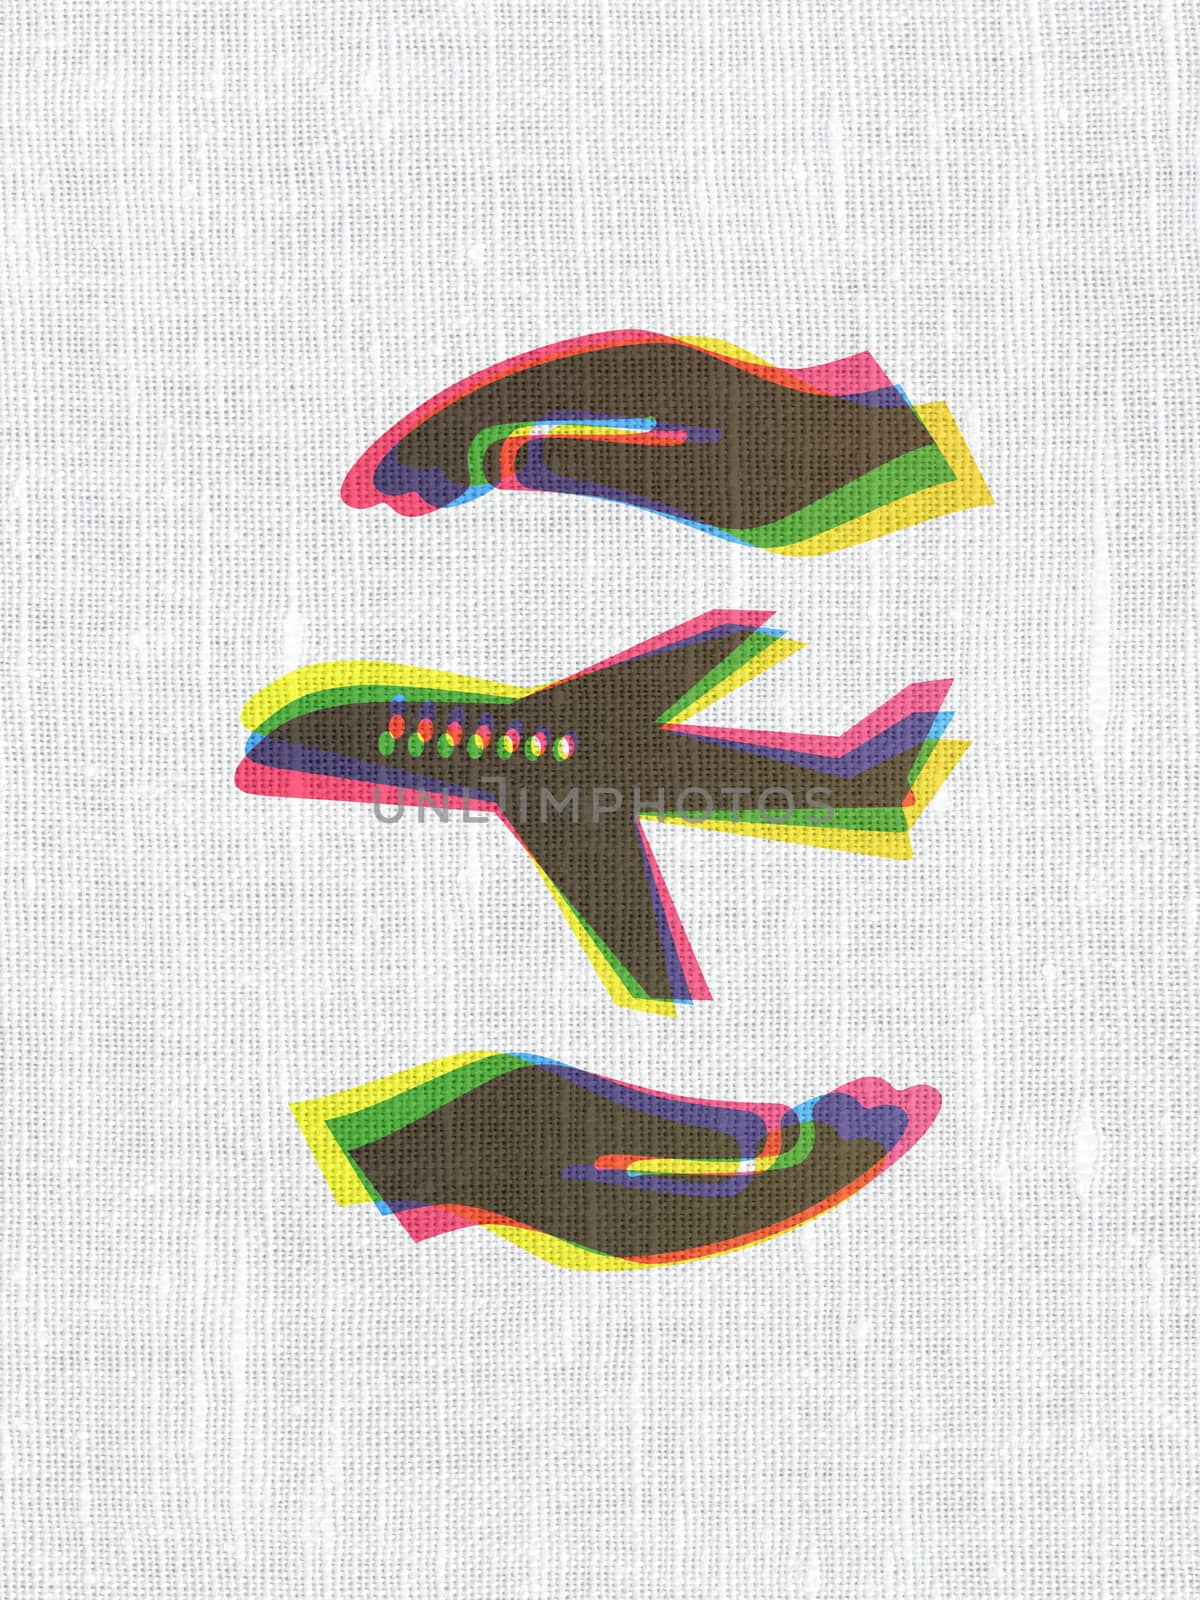 Insurance concept: CMYK Airplane And Palm on linen fabric texture background